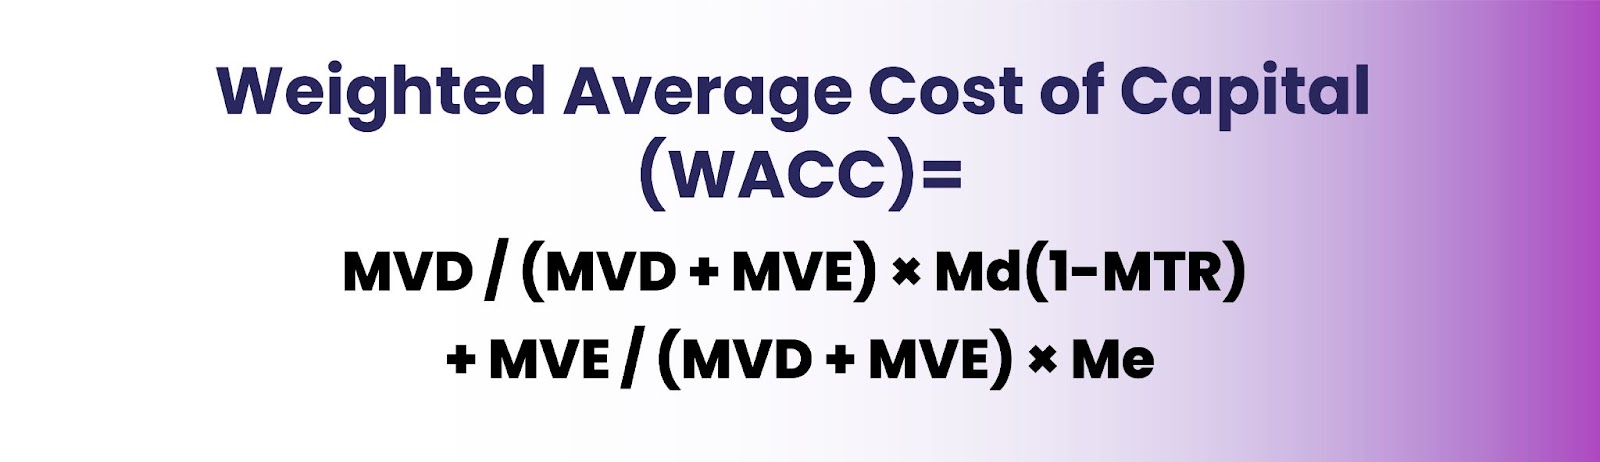 Weighted average cost of capital 